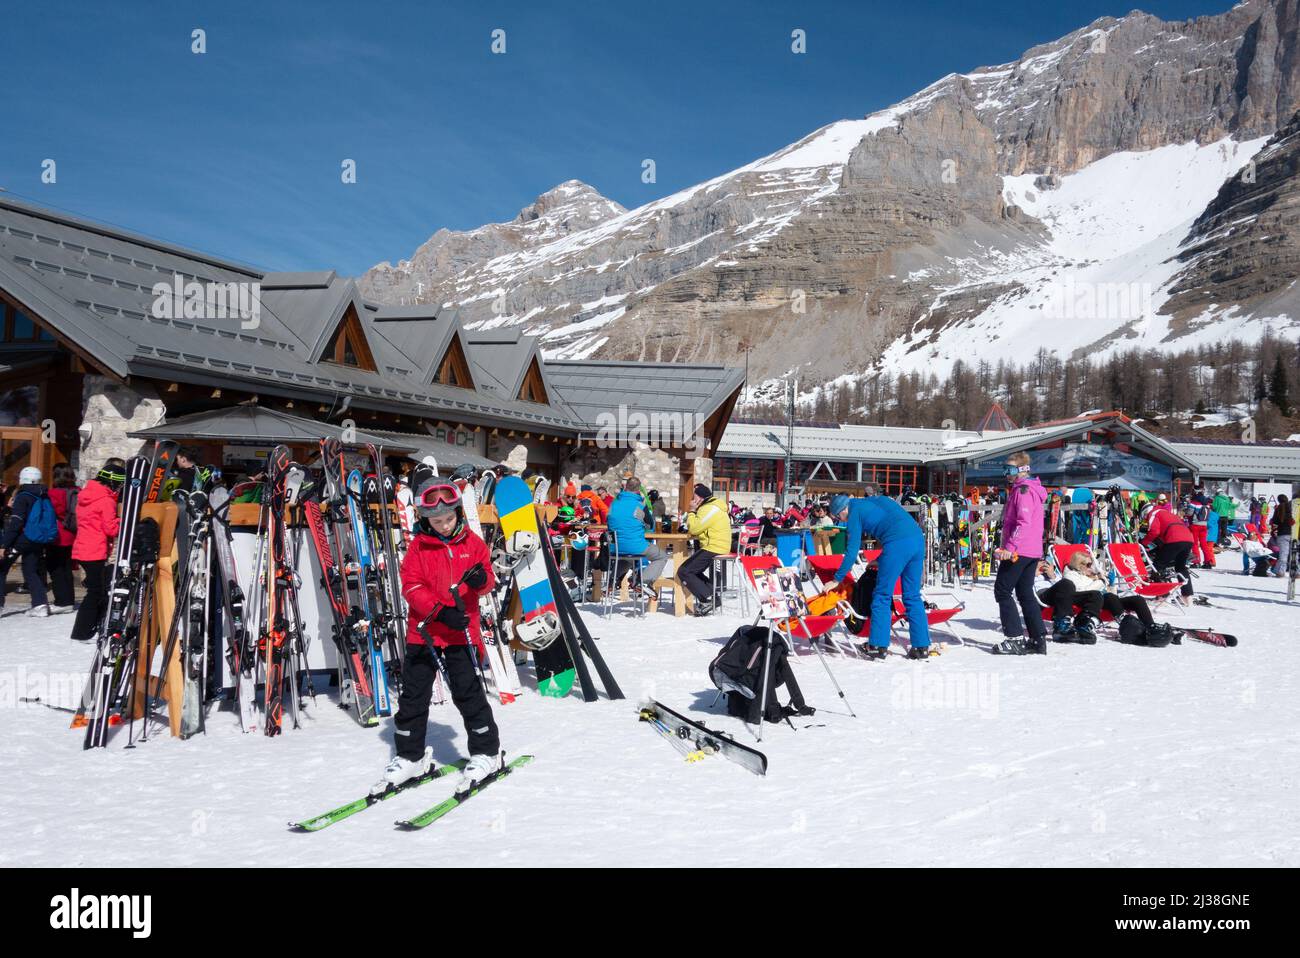 Children skiing at the Boch Cafe on the ski slopes for lunch, on a ski holiday, Madonna di Campiglio Dolomites Italy Europe Stock Photo